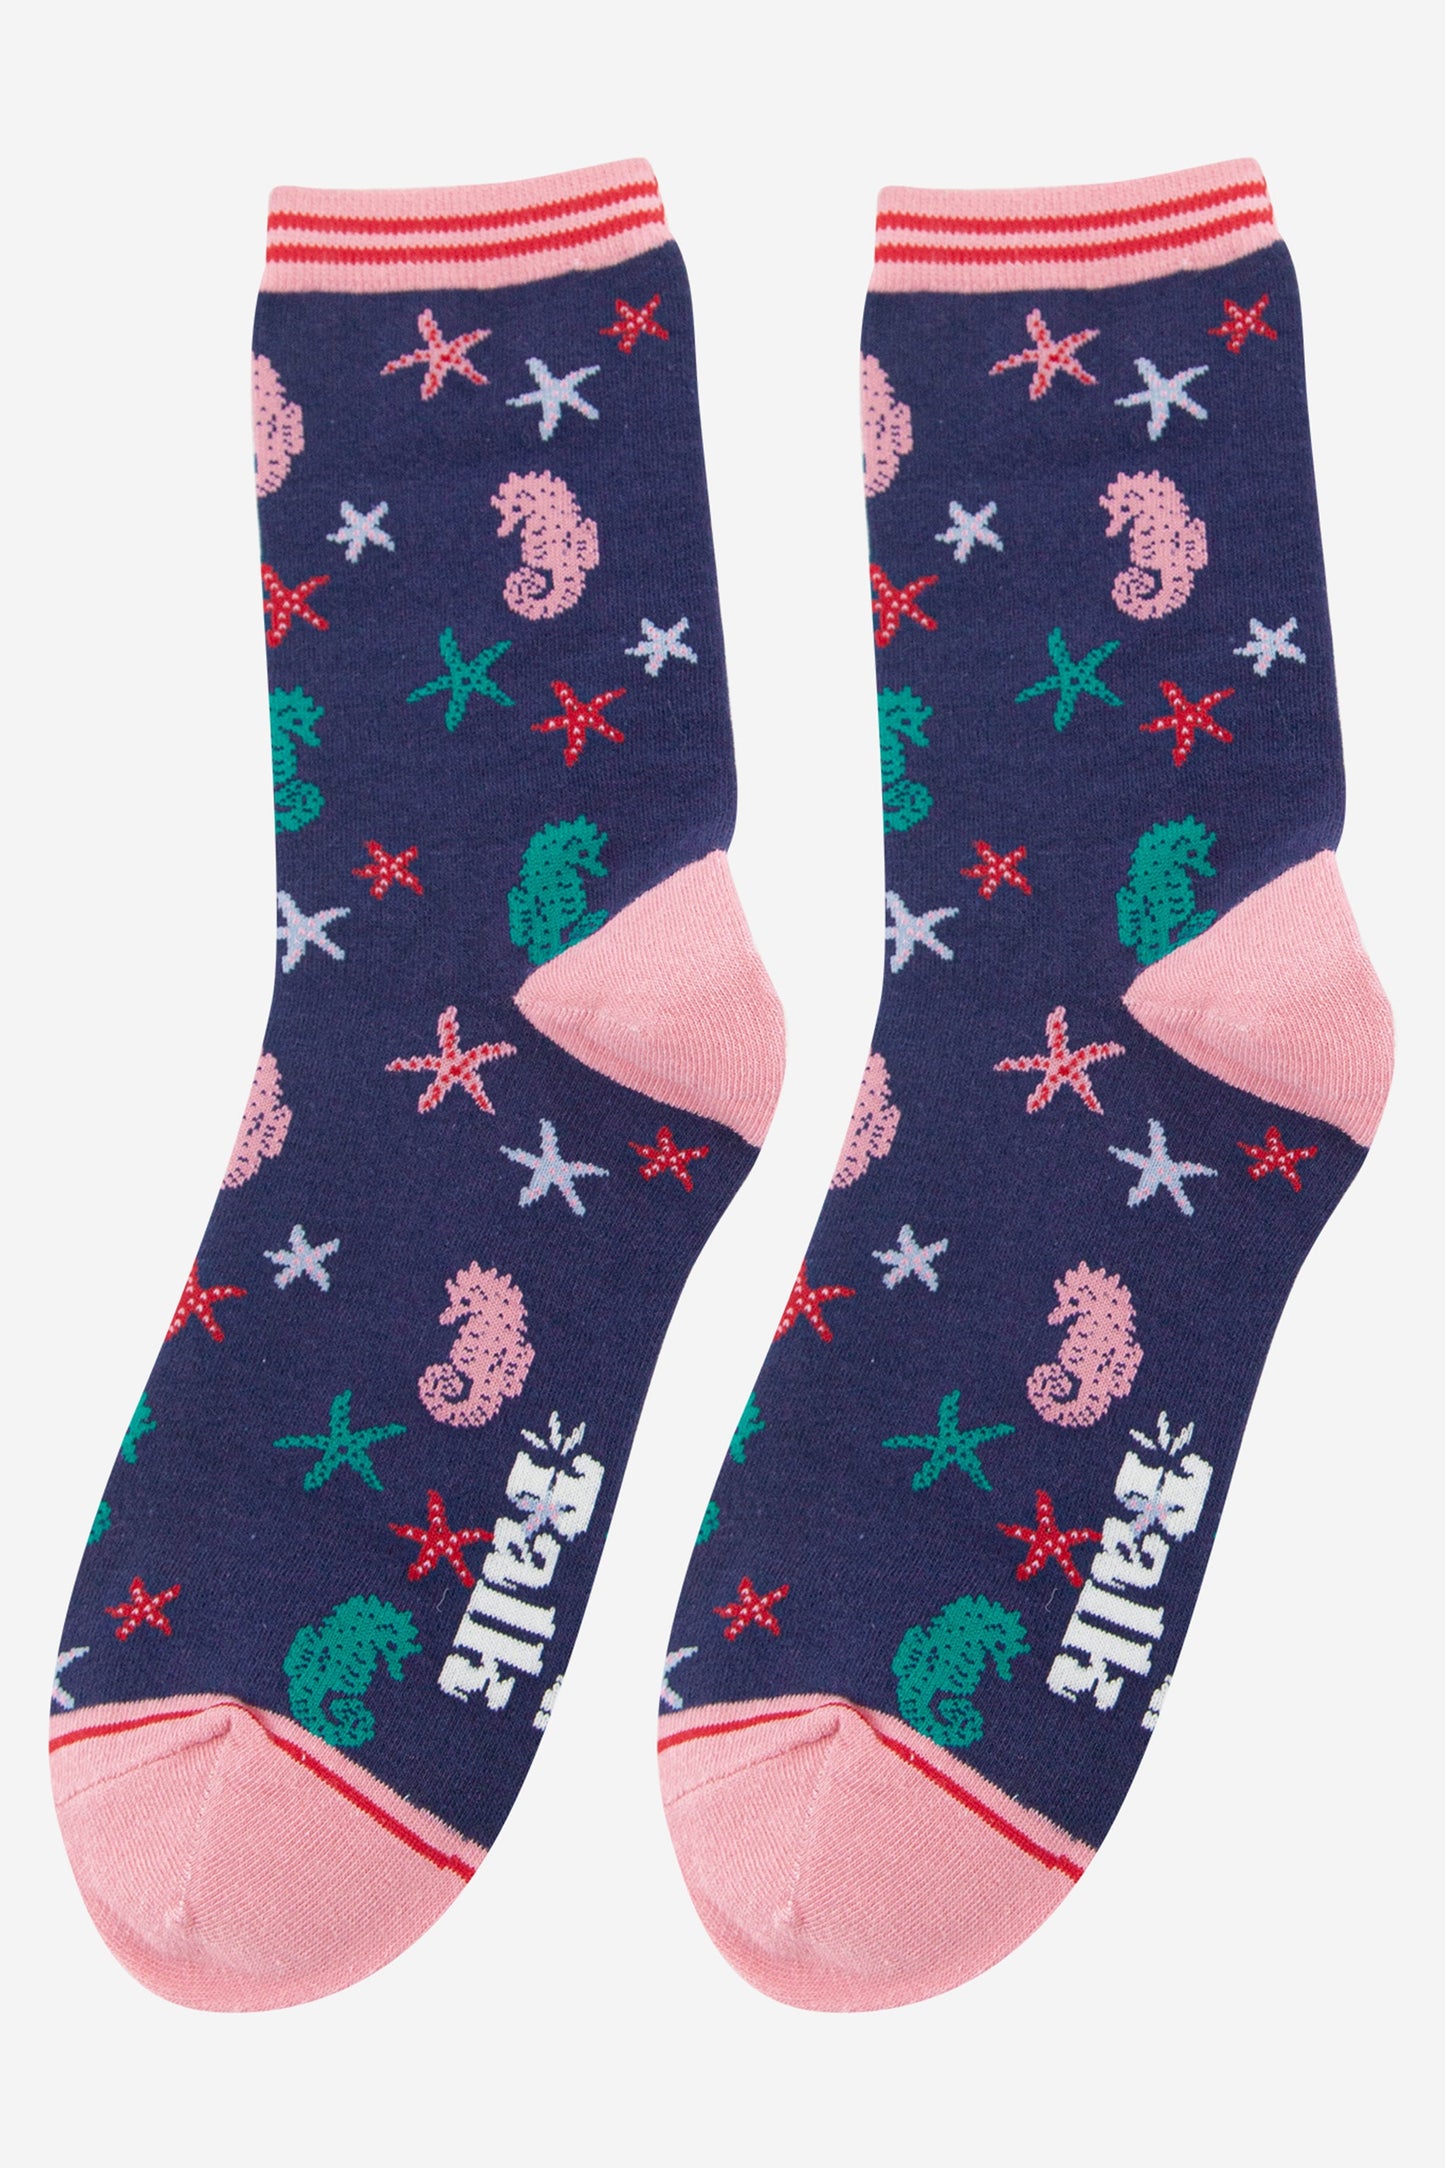 navy blue and pink nautical themes ankle socks with seahorses and star fish